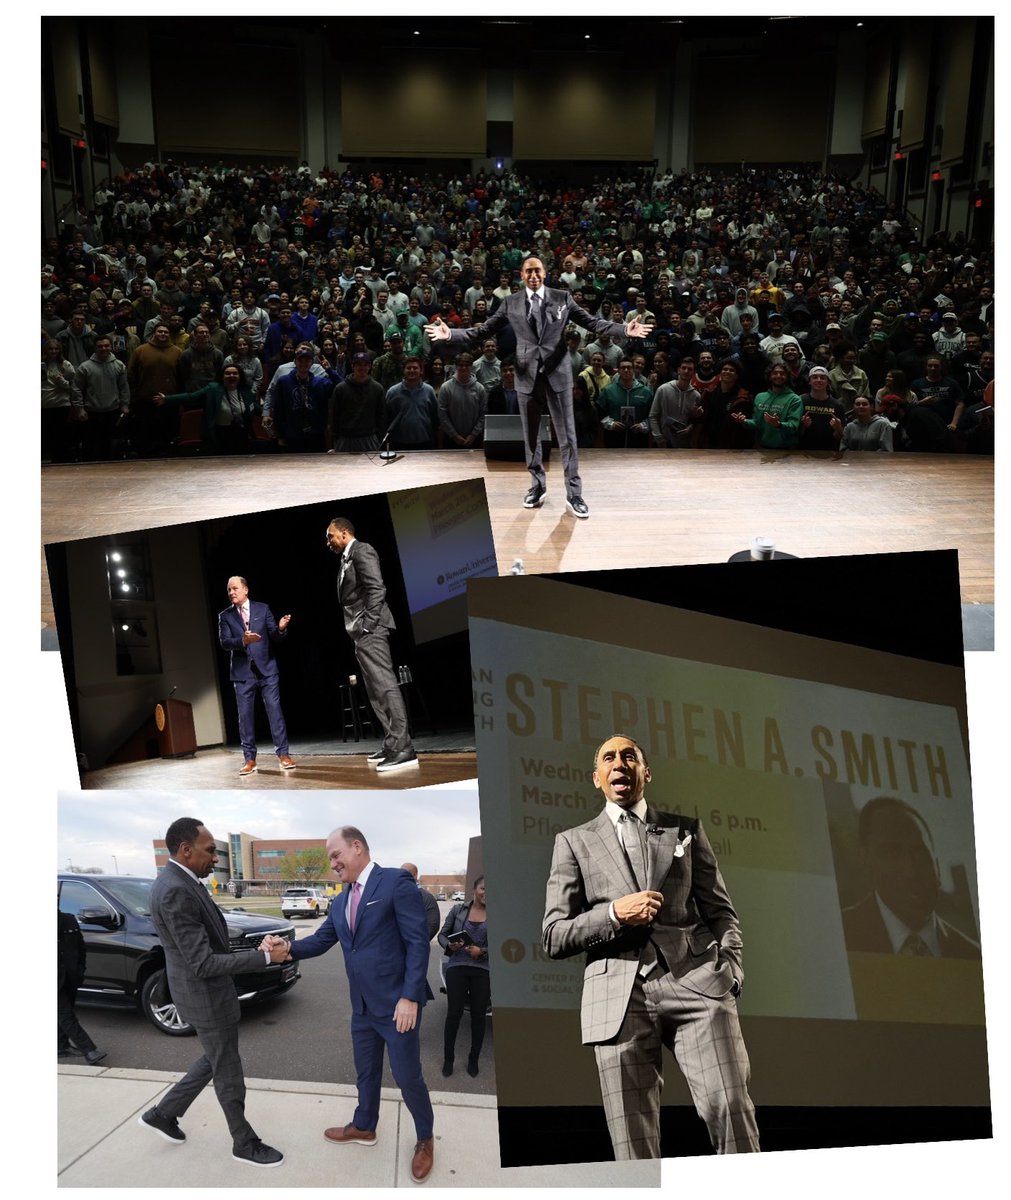 What a night with @stephenasmith at @RowanUniversity. We had a packed concert hall with 800 students (unfortunately not everyone got in) and his talk was so inspiring. I love what we are building with our @RowanSportsCAM program!